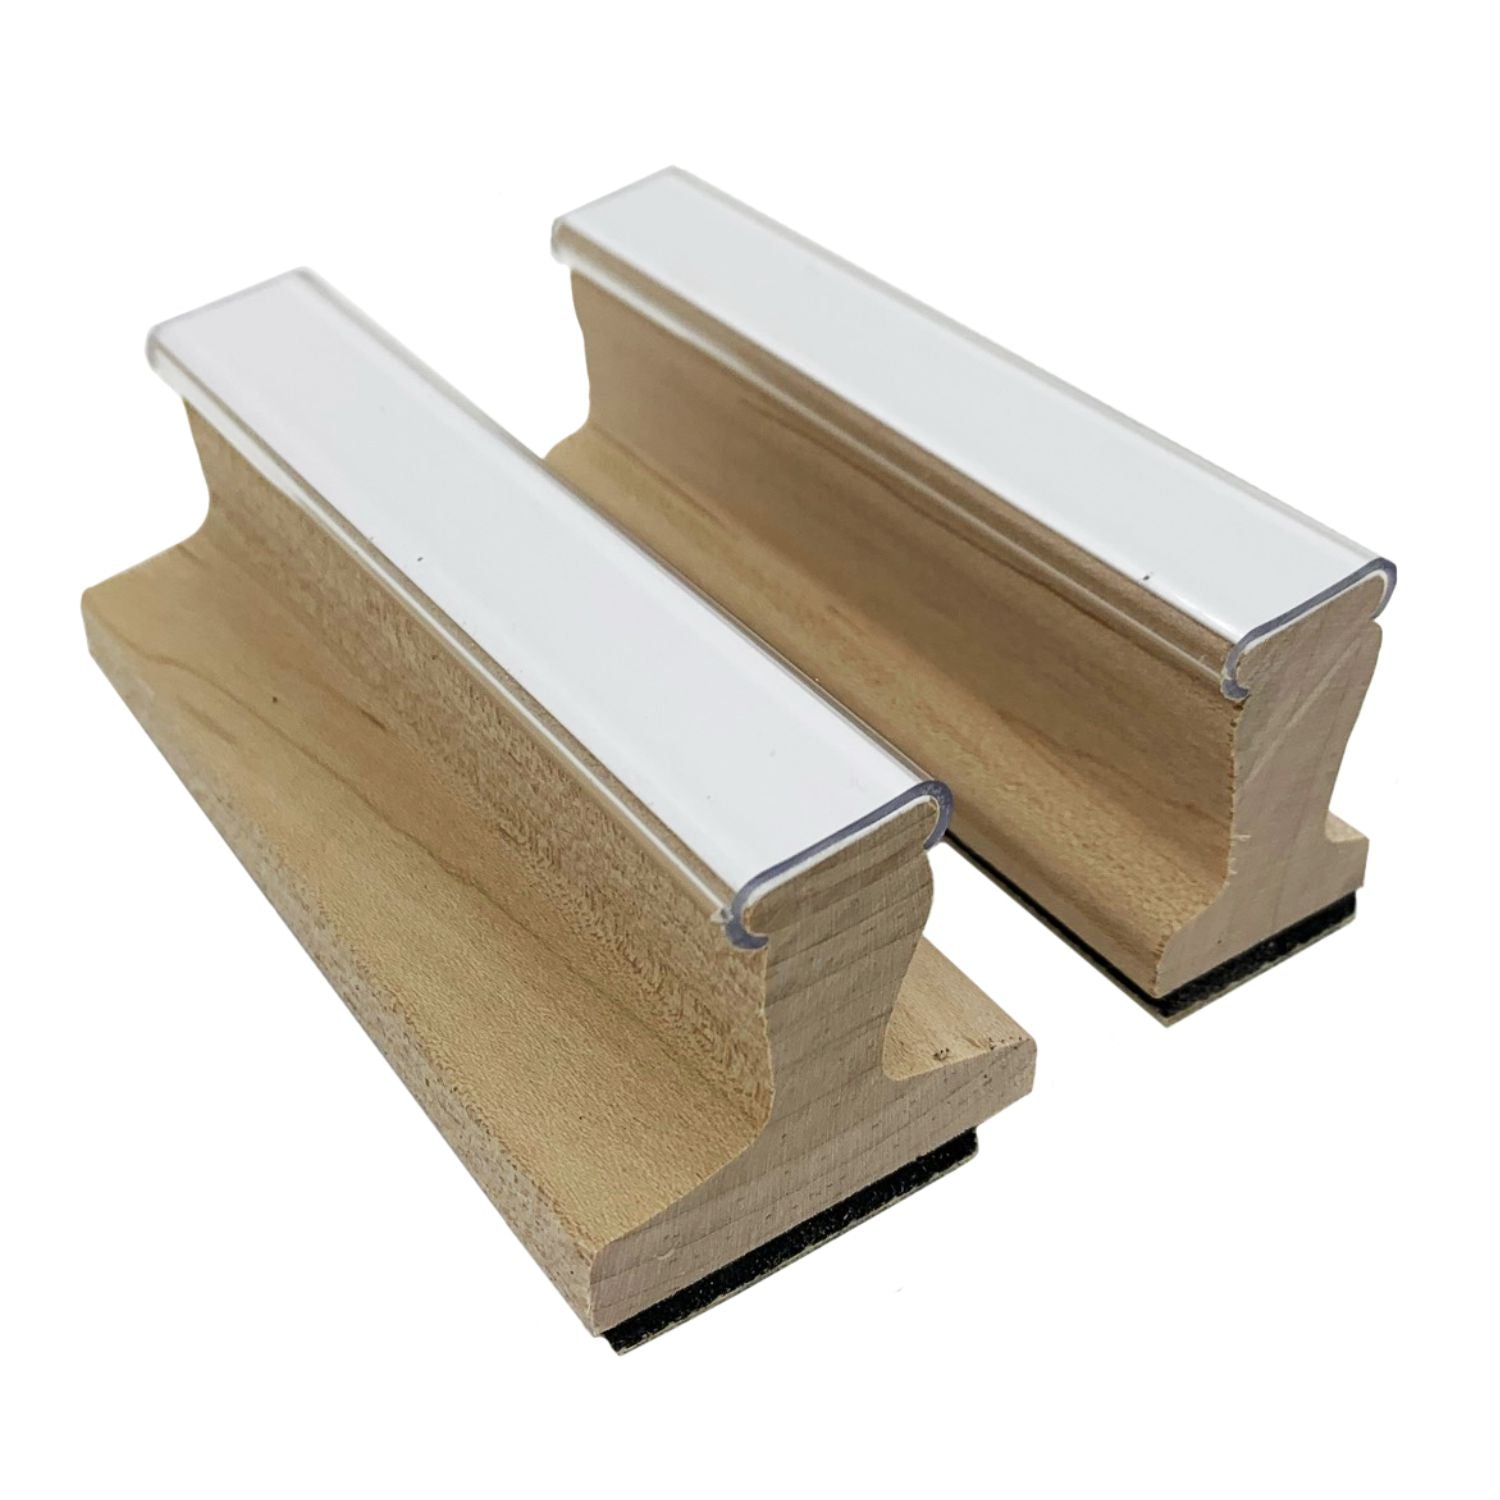 Coverdex Molding Wood Mount Strips - Rubber Stamp Materials